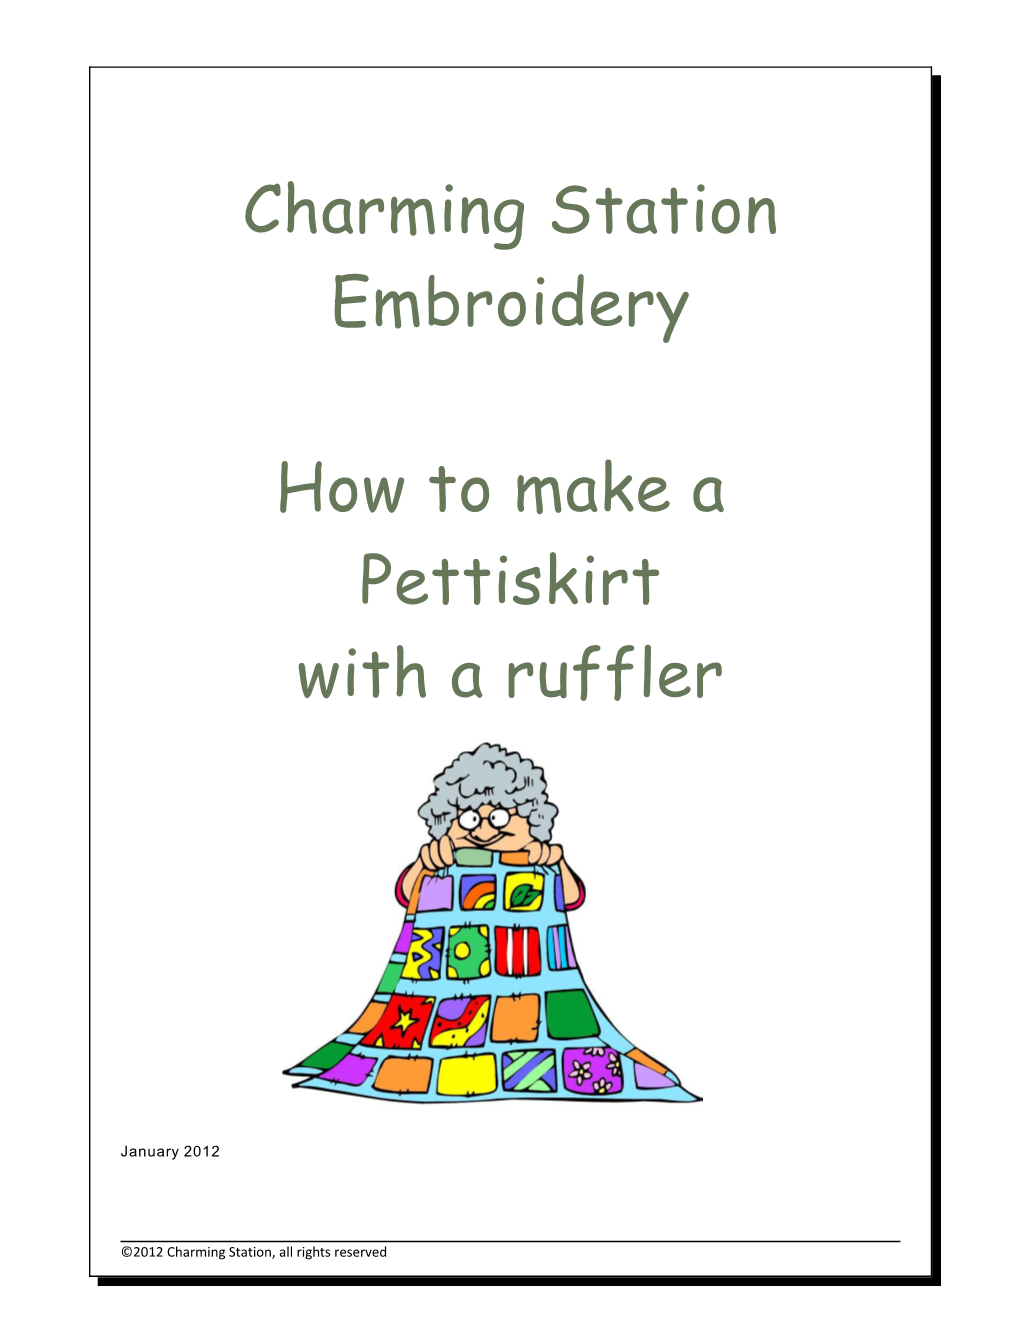 Charming Station Embroidery How to Make a Pettiskirt with a Ruffler